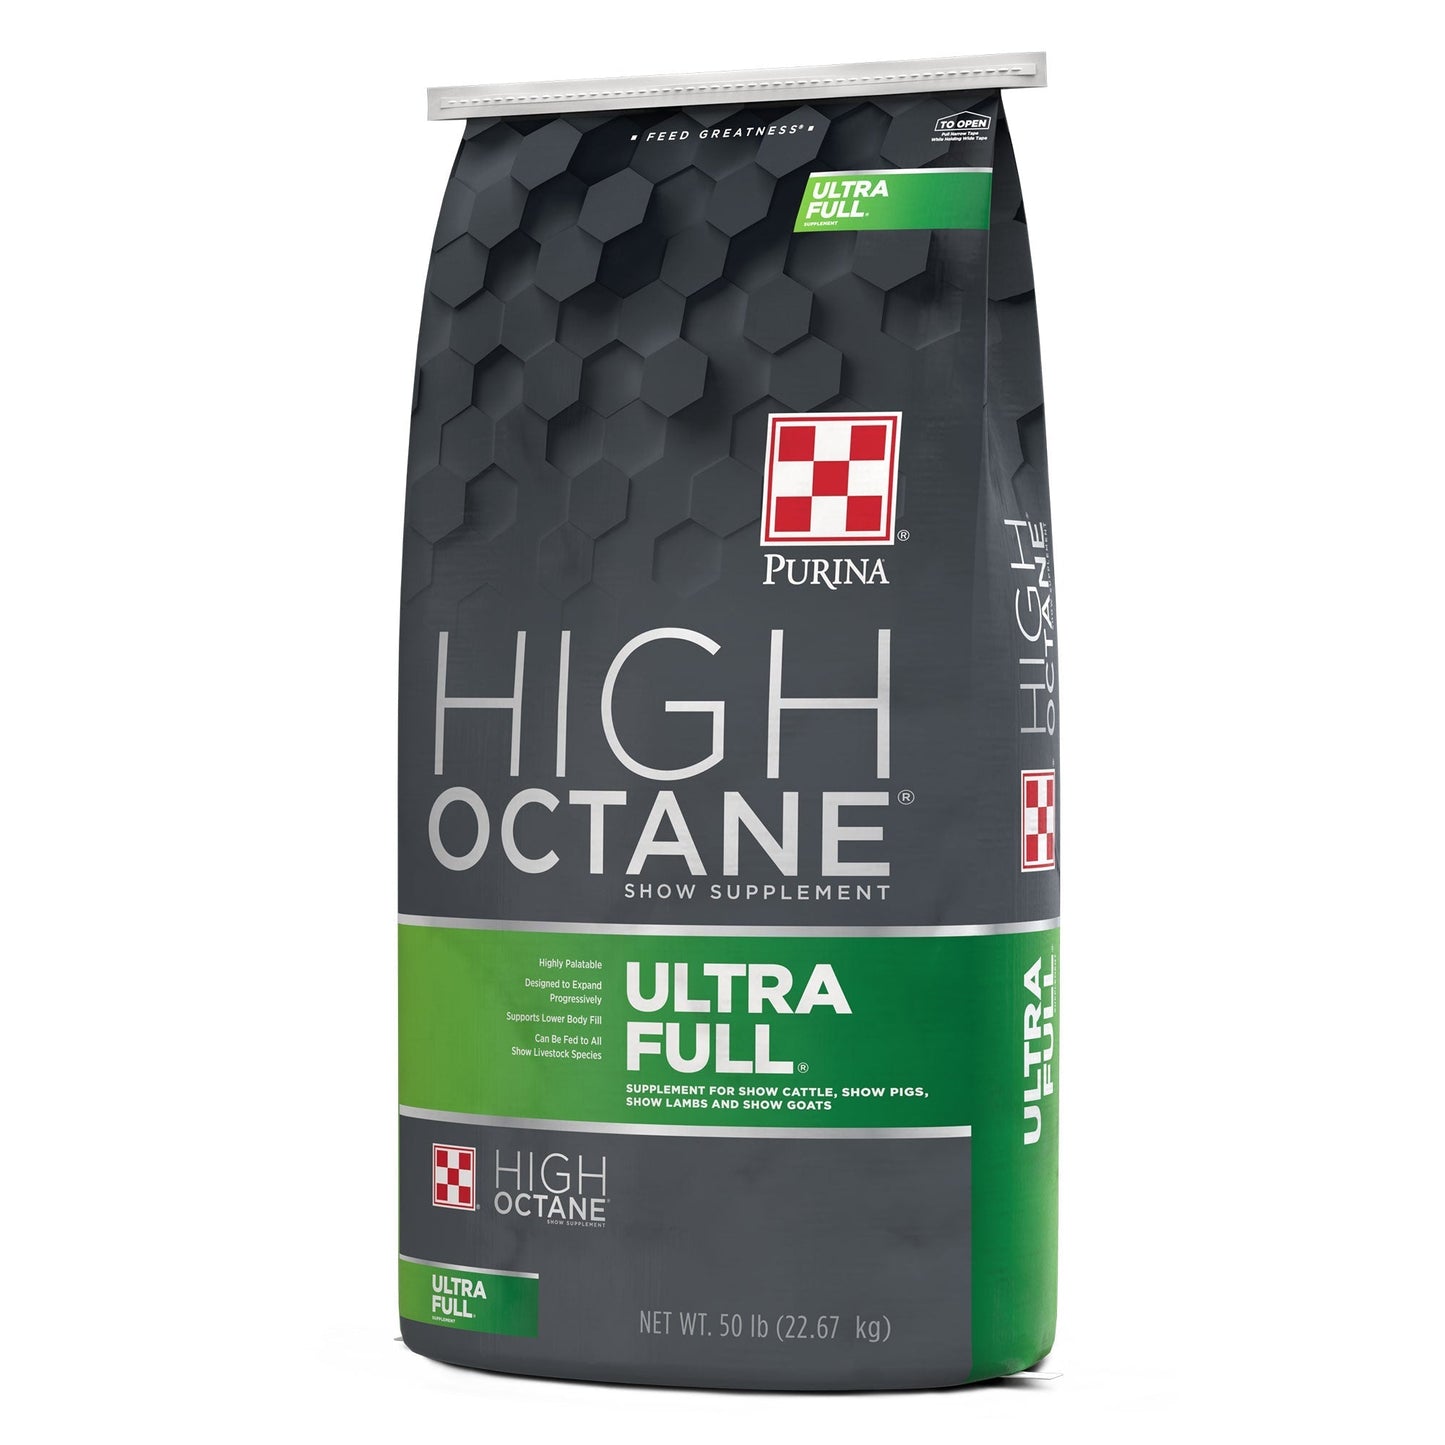 Right angle of Purina High Octane Ultra Full Show Supplement